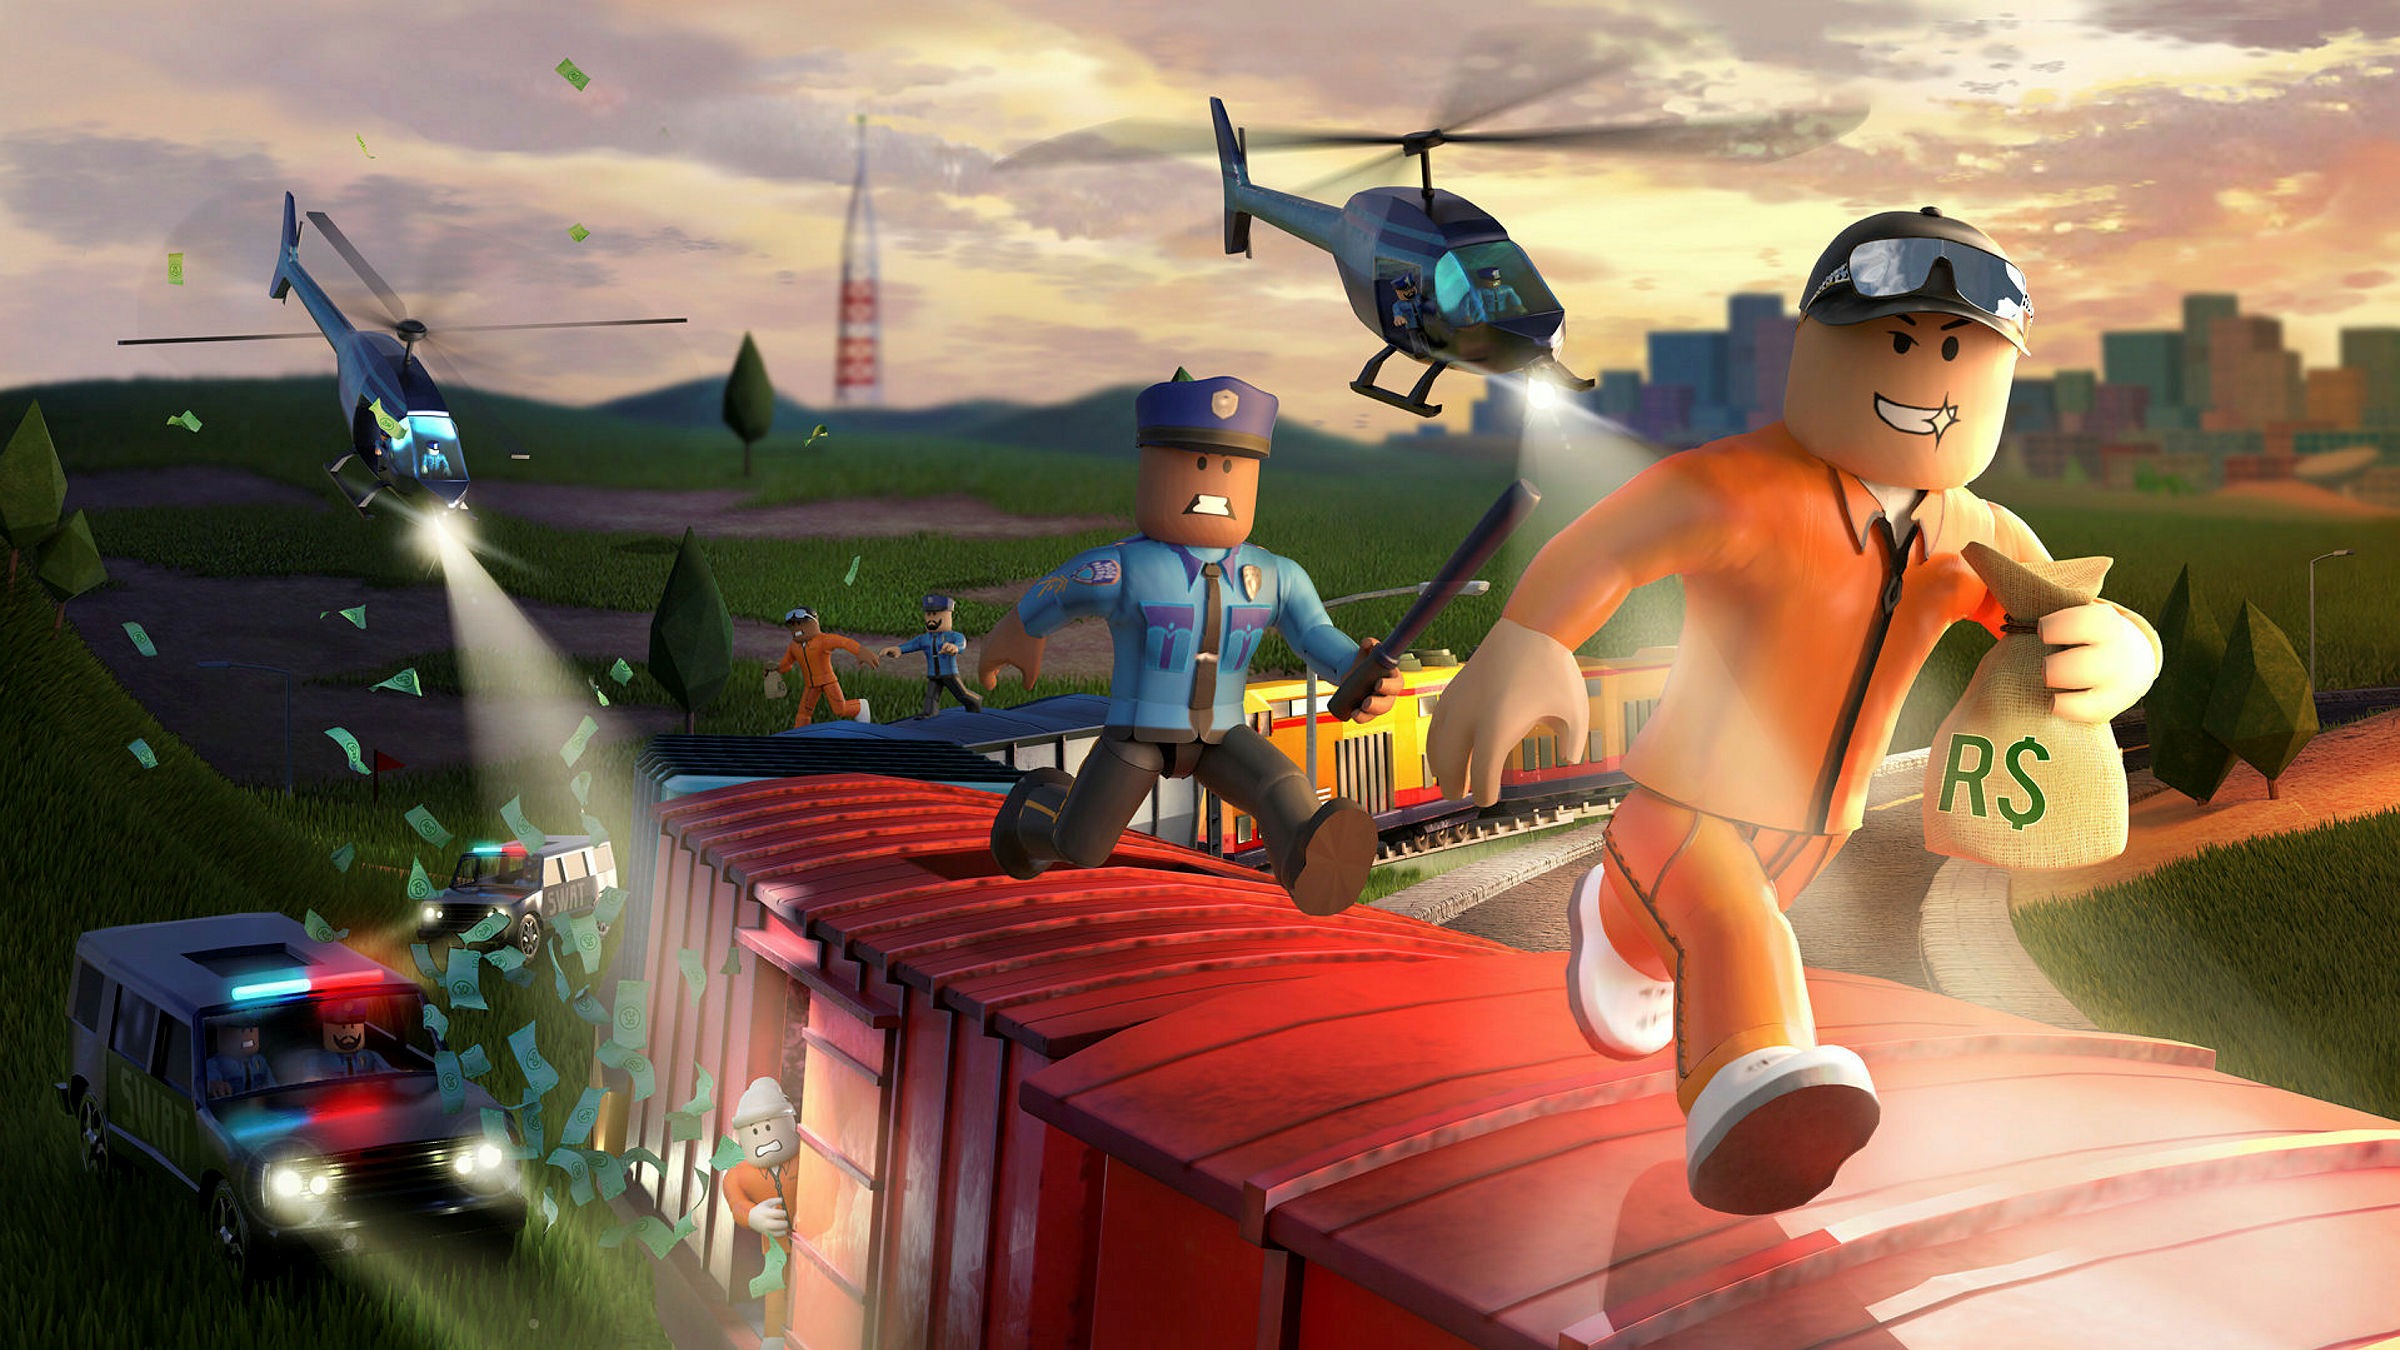 Roblox closes at $38bn valuation on first day of trading | Financial Times